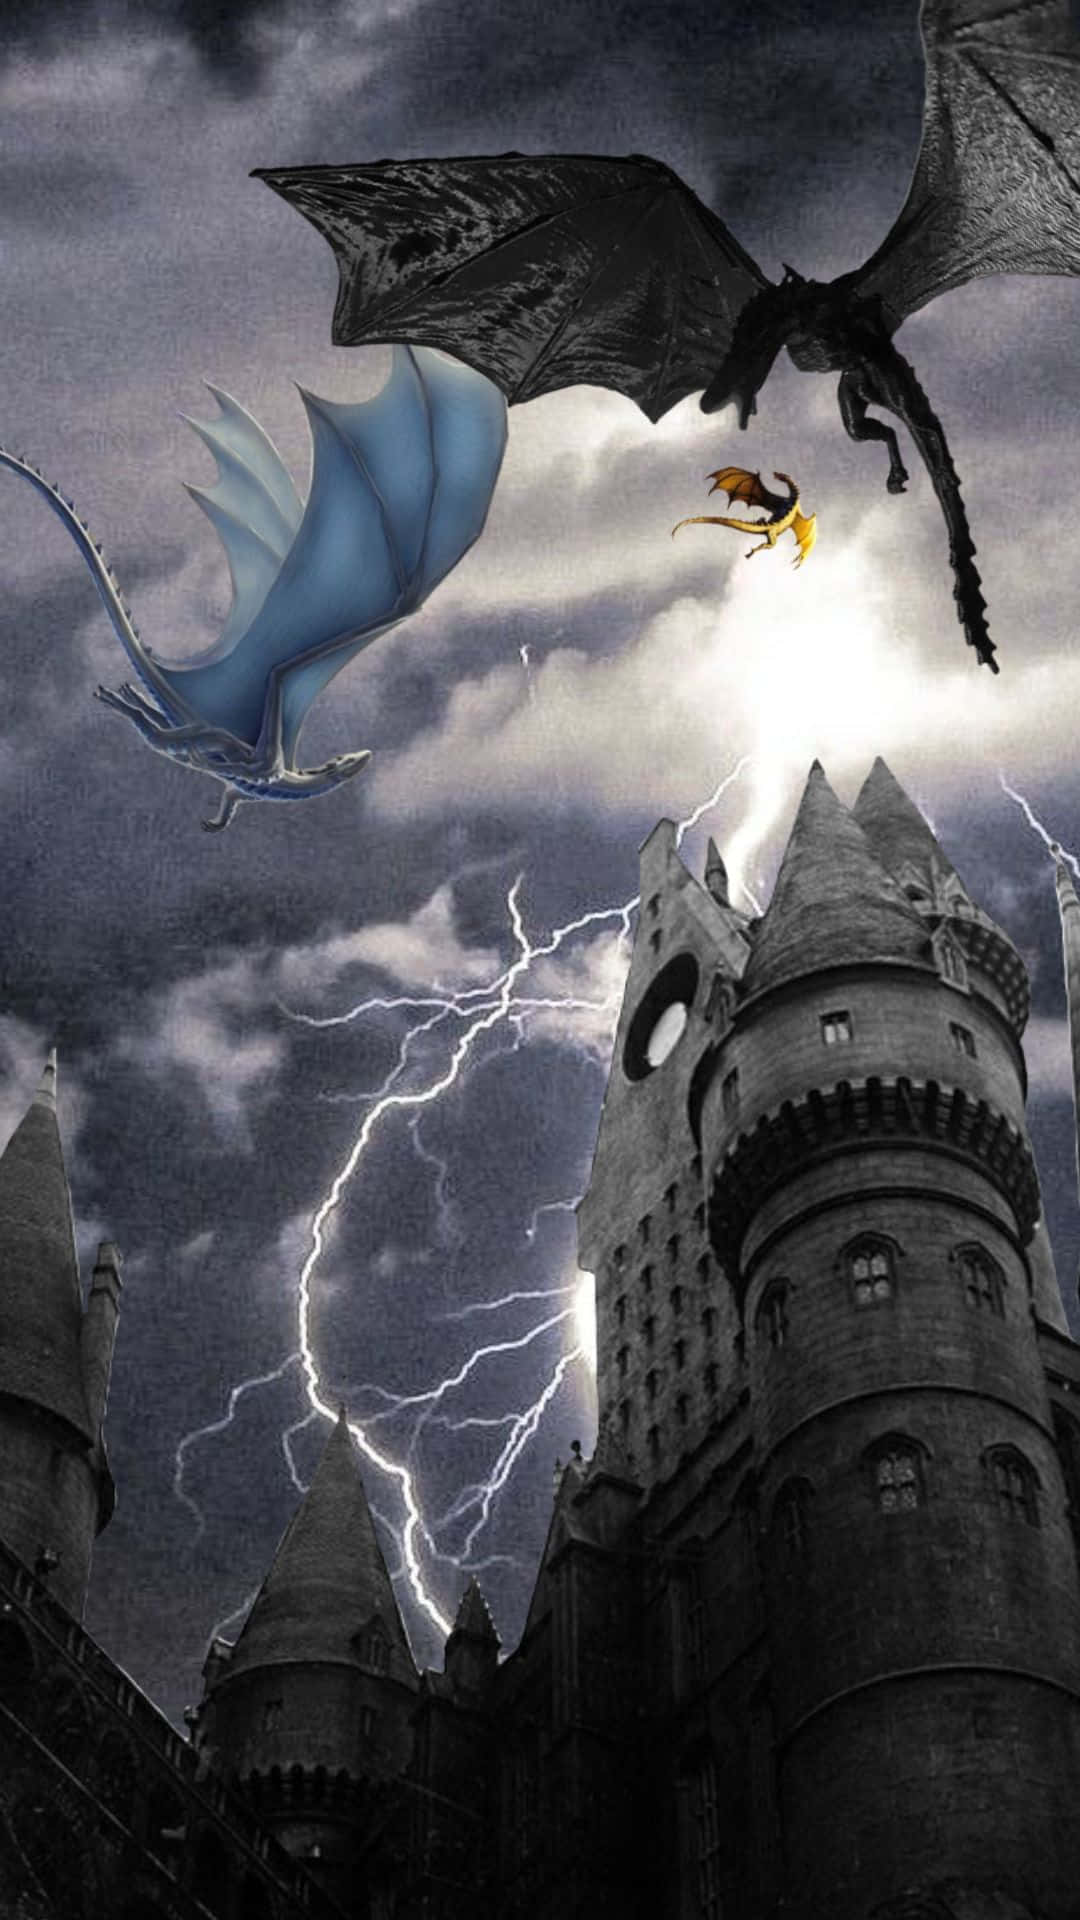 Gothic_ Dragons_ Stormy_ Castle Wallpaper